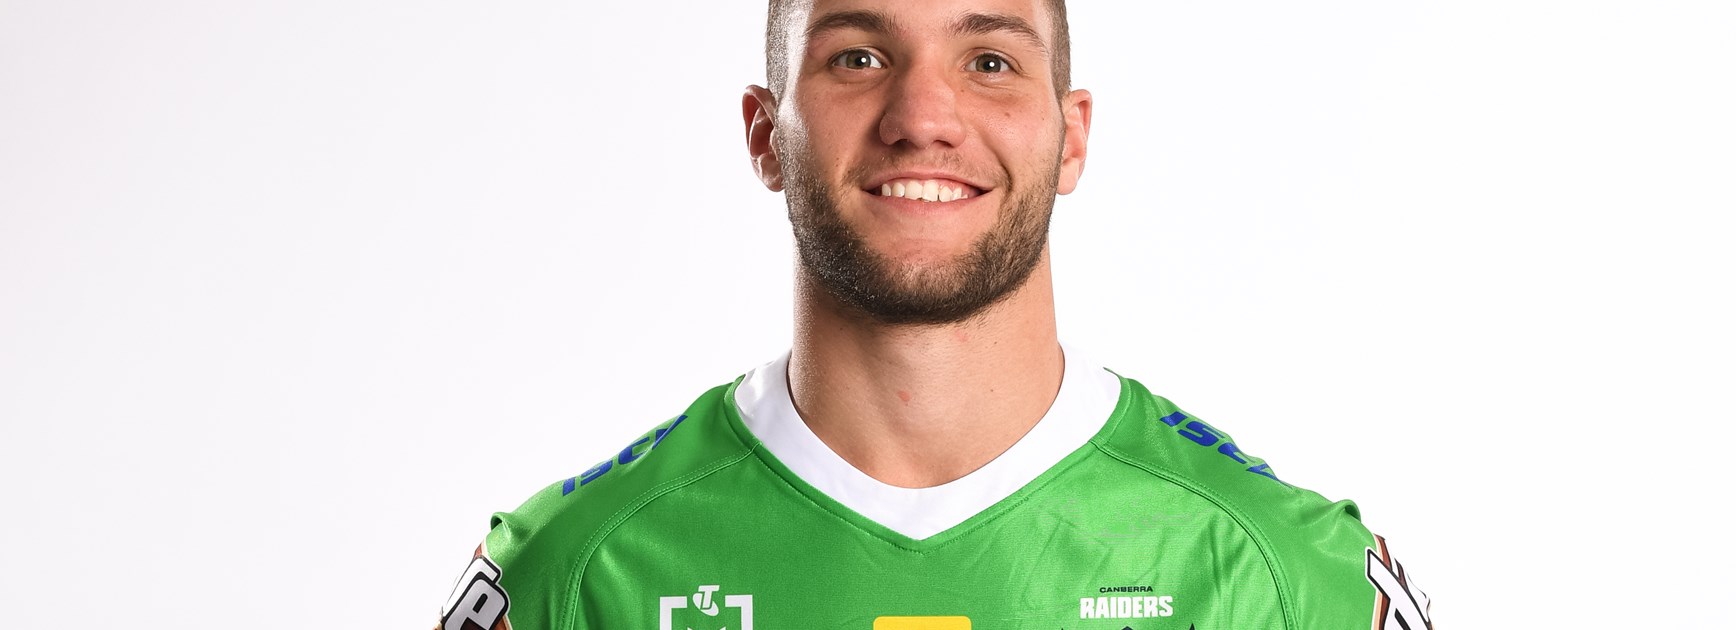 Jarrett Subloo made his NRL debut in 2020 with Canberra Raiders. Photo: NRL Images